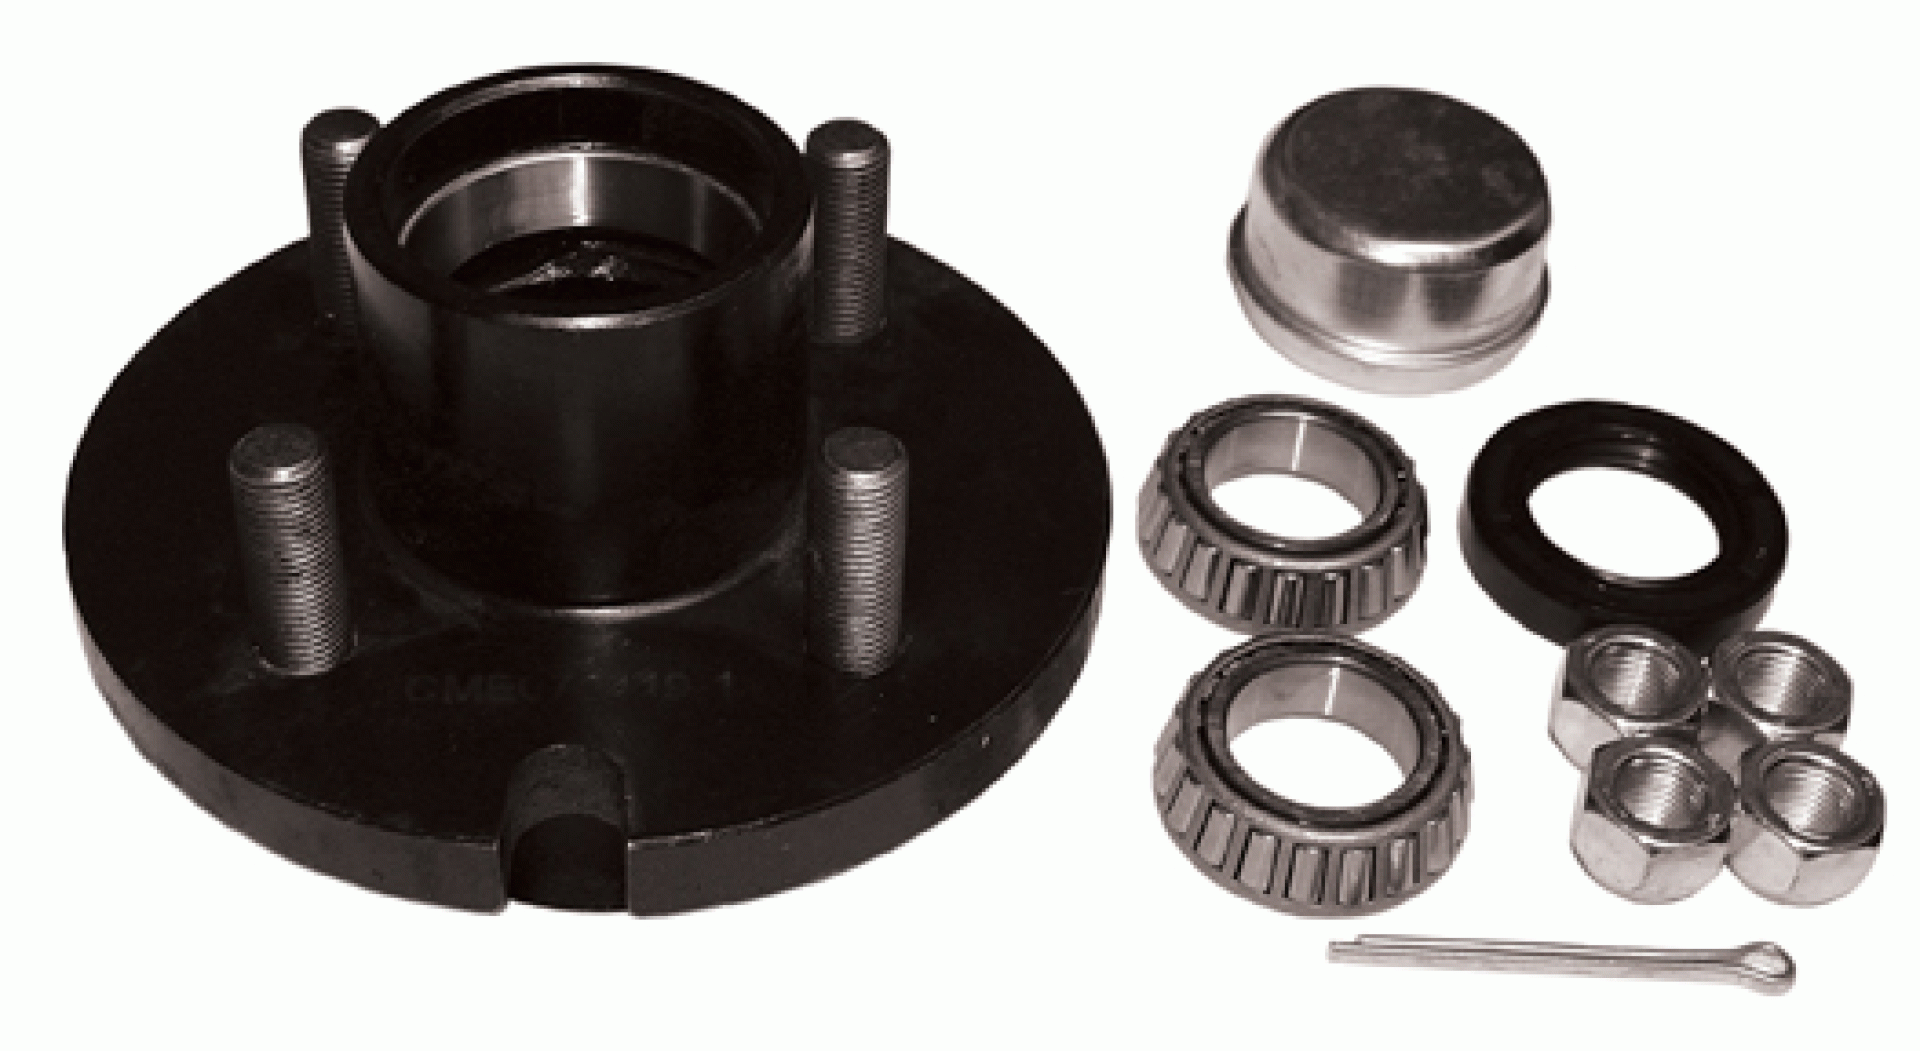 DEXTER MARINE PRODUCTS OF GEORGIA LC | 81067 | 1-1/16" SPINDLE 440 1250 LB. CAPACITY - BOXED HUB COMPLETE